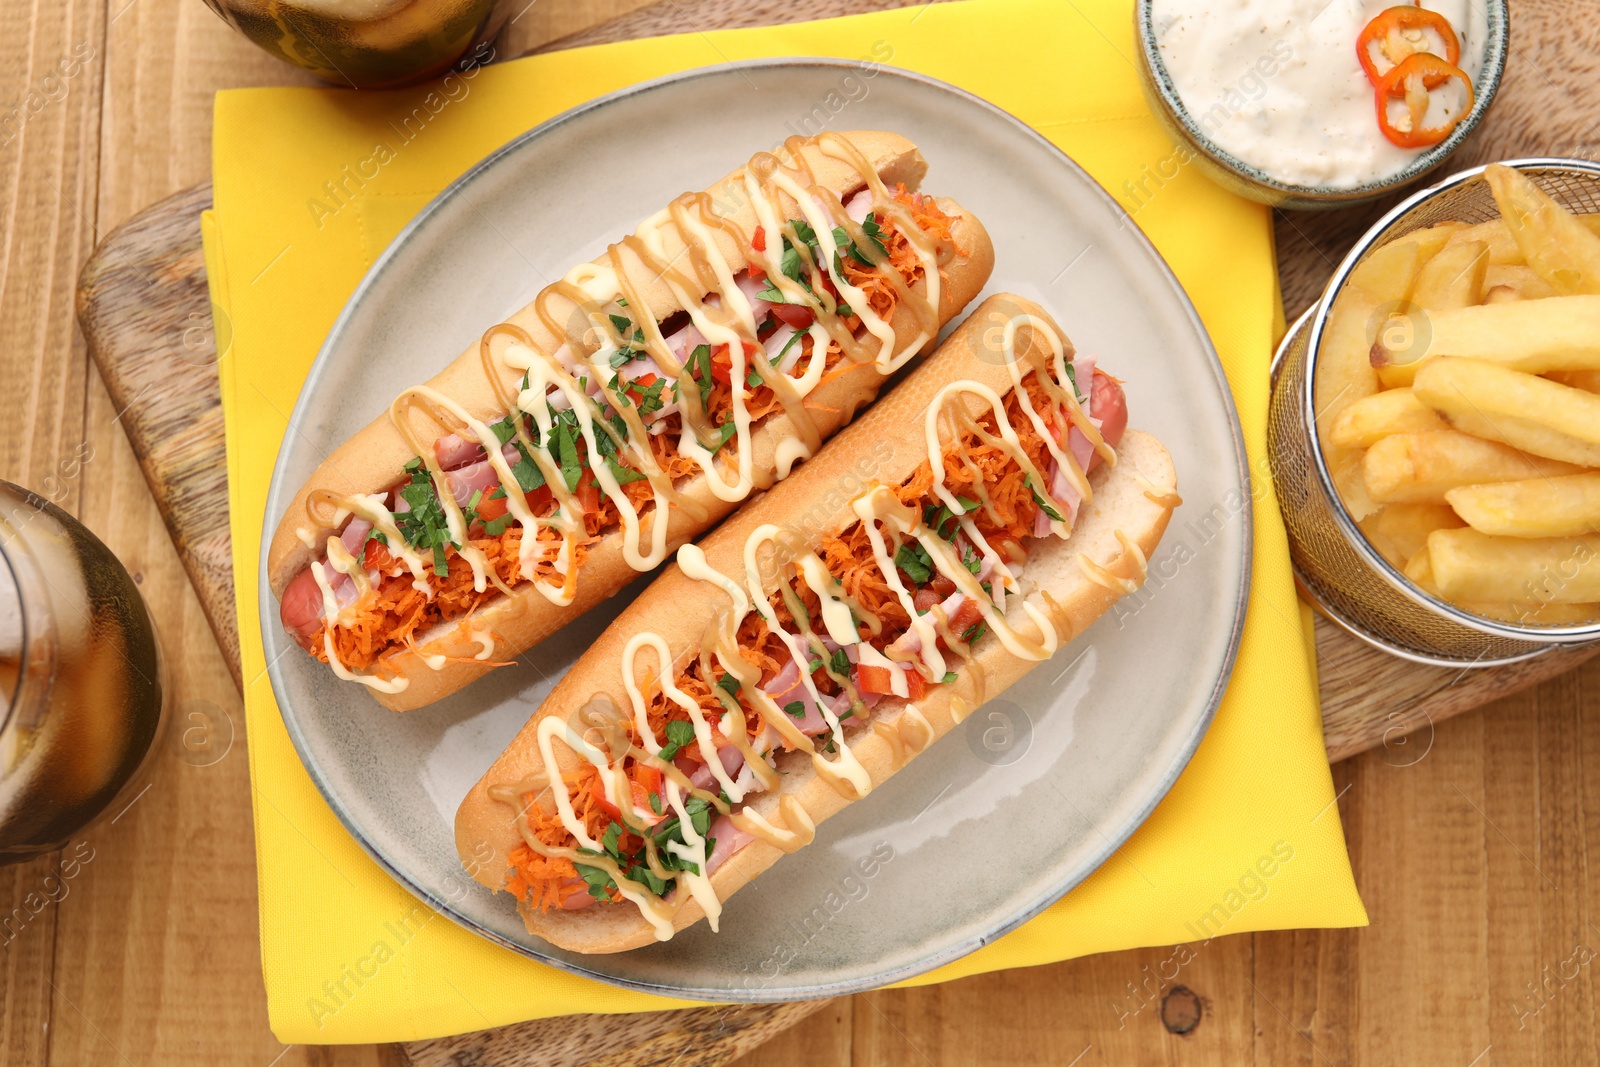 Photo of Delicious hot dogs with bacon, carrot and parsley served on wooden table, flat lay